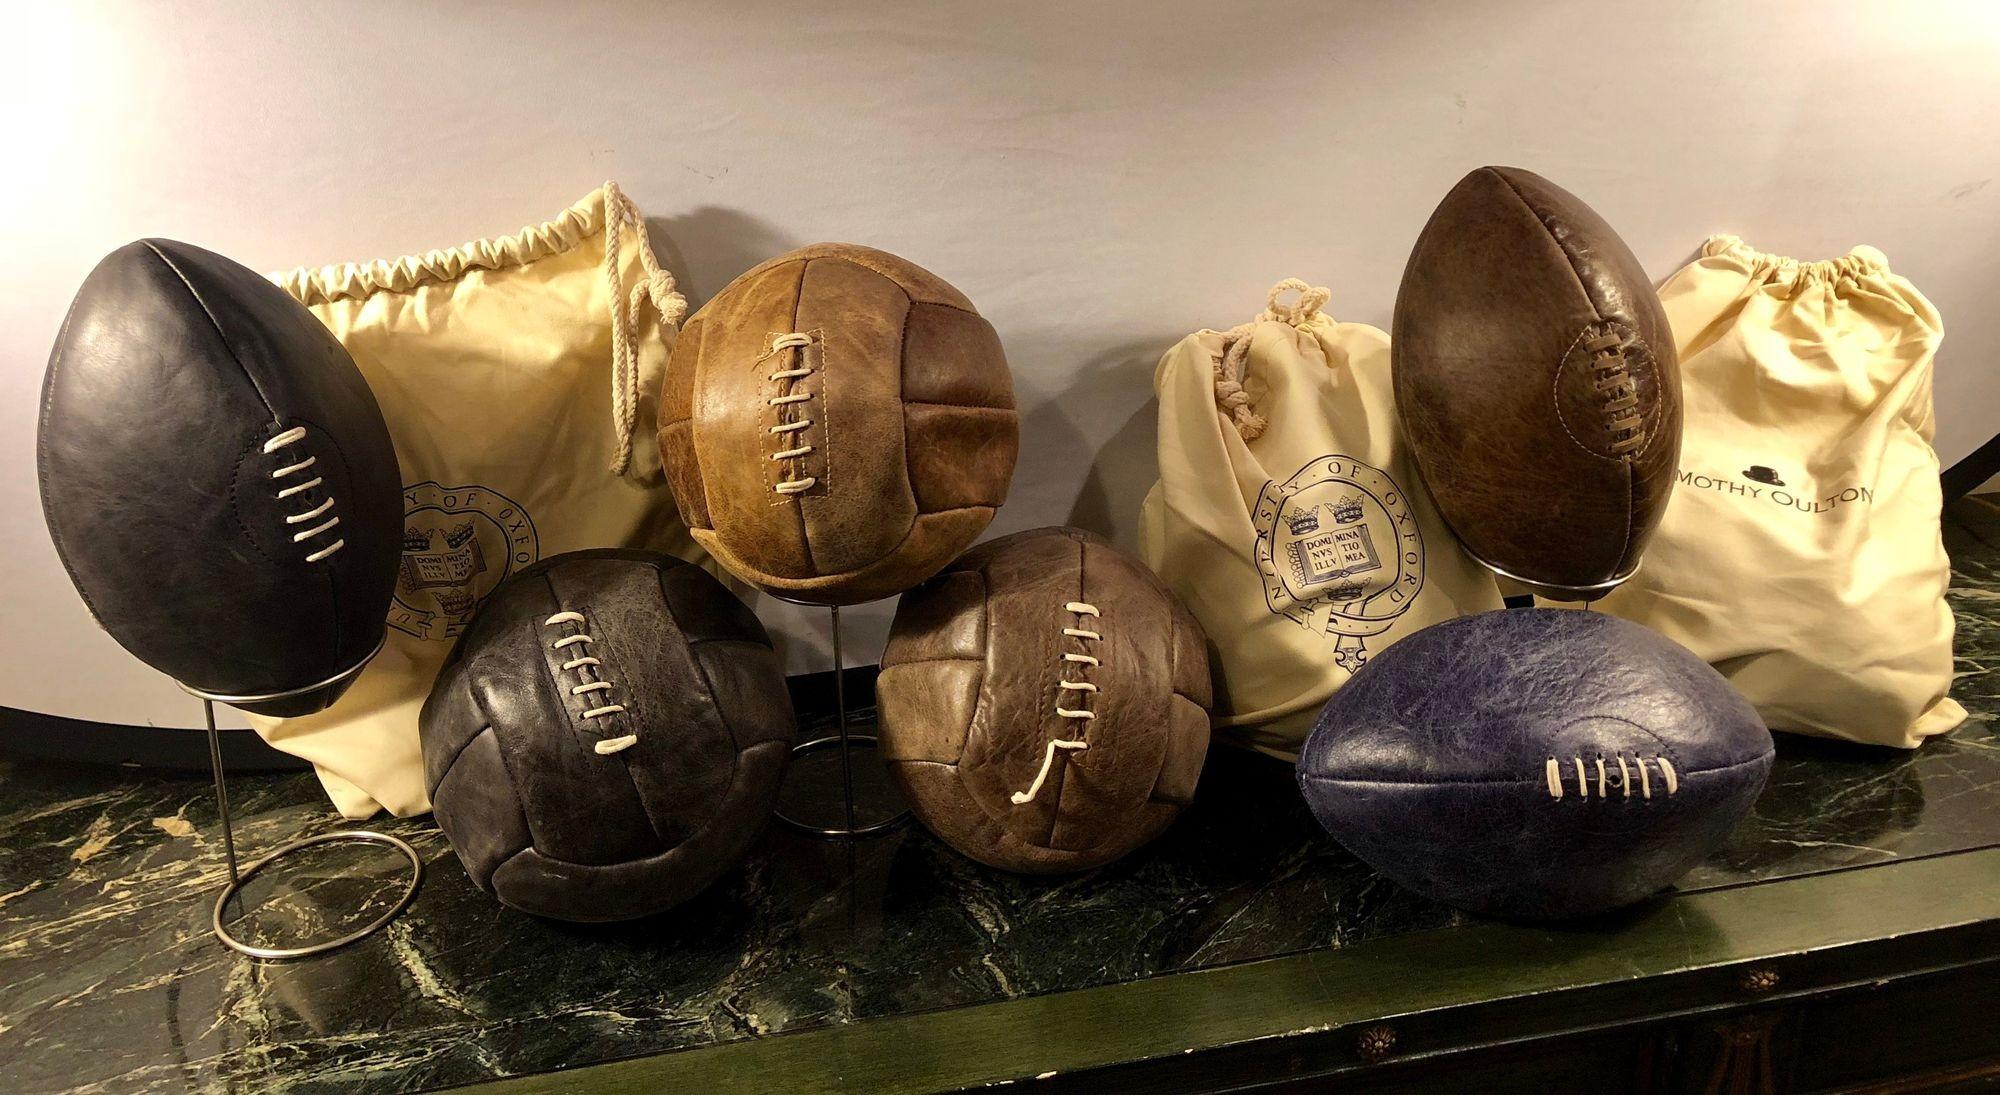 A group of seven footballs and soccer balls by Timothy Oulton. Each ball comes with a 'oxford university' canvas bag, and a pin to inflate. All are worn as is the intended and desired look and design. Perfect to decorate an office, poolroom,